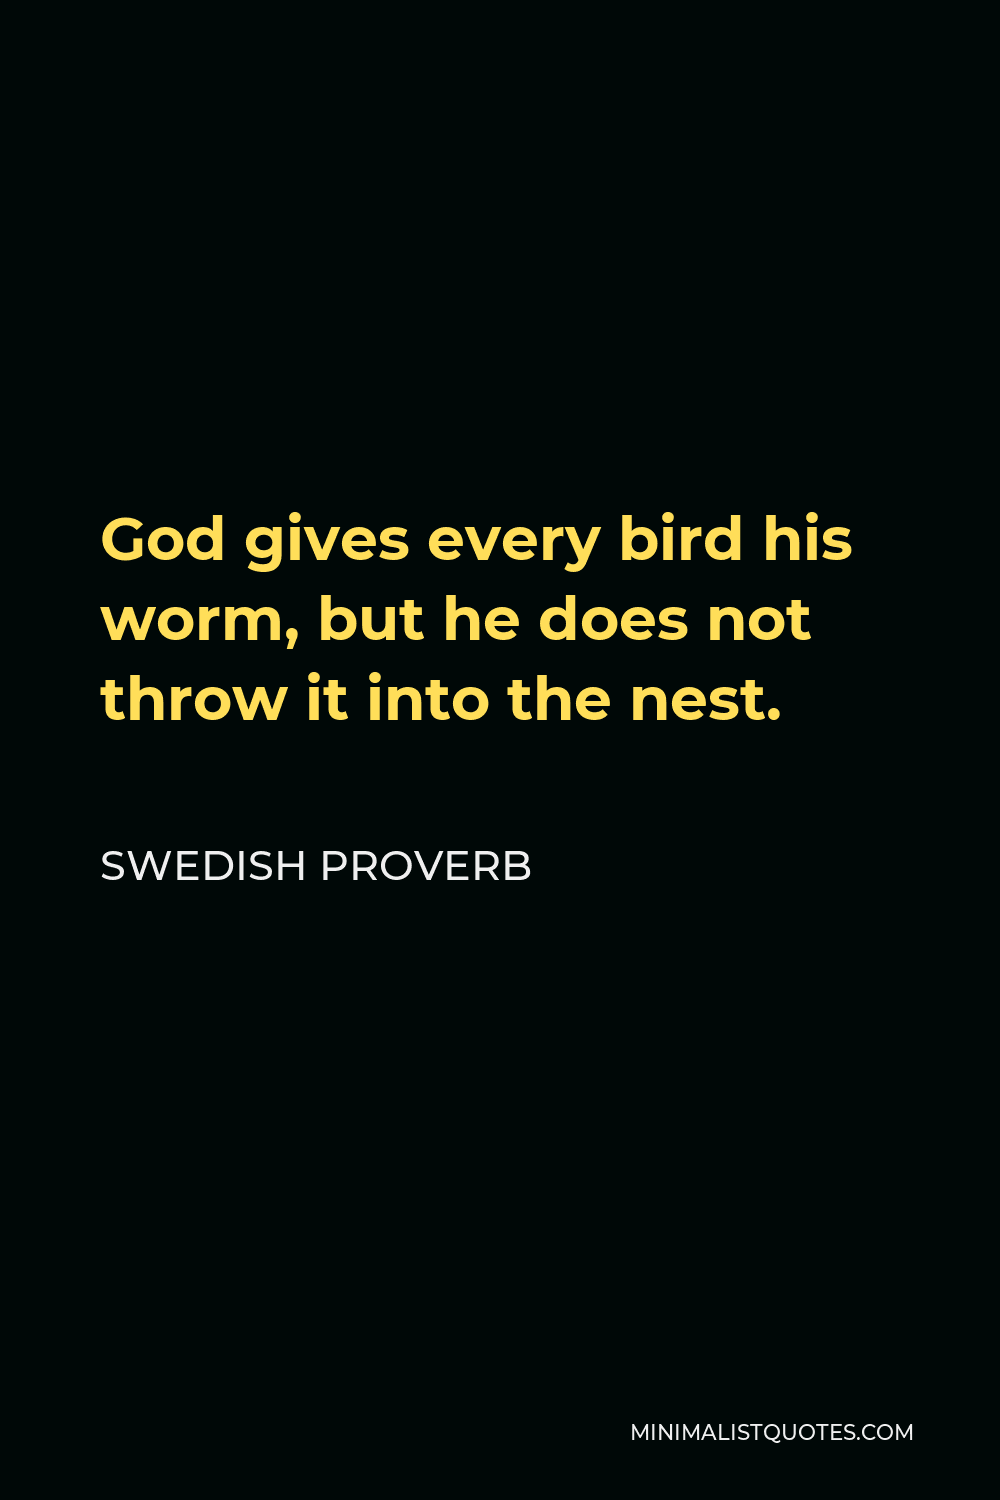 Swedish Proverb Quote - God gives every bird his worm, but he does not throw it into the nest.